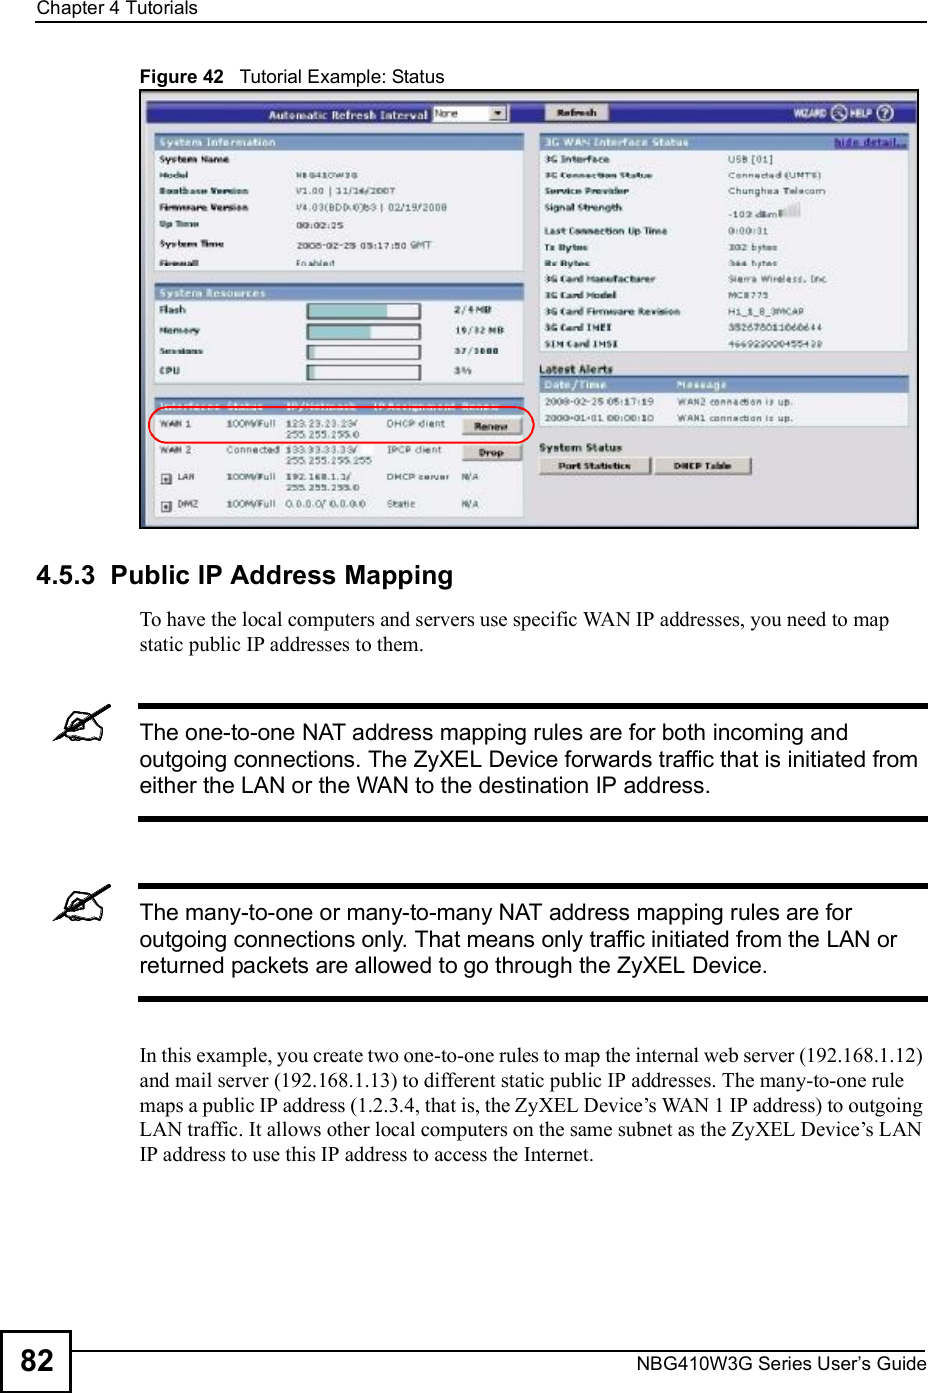 Chapter 4TutorialsNBG410W3G Series User s Guide82Figure 42   Tutorial Example: Status4.5.3  Public IP Address MappingTo have the local computers and servers use specific WAN IP addresses, you need to map static public IP addresses to them.The one-to-one NAT address mapping rules are for both incoming and outgoing connections. The ZyXEL Device forwards traffic that is initiated from either the LAN or the WAN to the destination IP address.The many-to-one or many-to-many NAT address mapping rules are for outgoing connections only. That means only traffic initiated from the LAN or returned packets are allowed to go through the ZyXEL Device.In this example, you create two one-to-one rules to map the internal web server (192.168.1.12) and mail server (192.168.1.13) to different static public IP addresses. The many-to-one rule maps a public IP address (1.2.3.4, that is, the ZyXEL Device!s WAN 1 IP address) to outgoing LAN traffic. It allows other local computers on the same subnet as the ZyXEL Device!s LAN IP address to use this IP address to access the Internet.